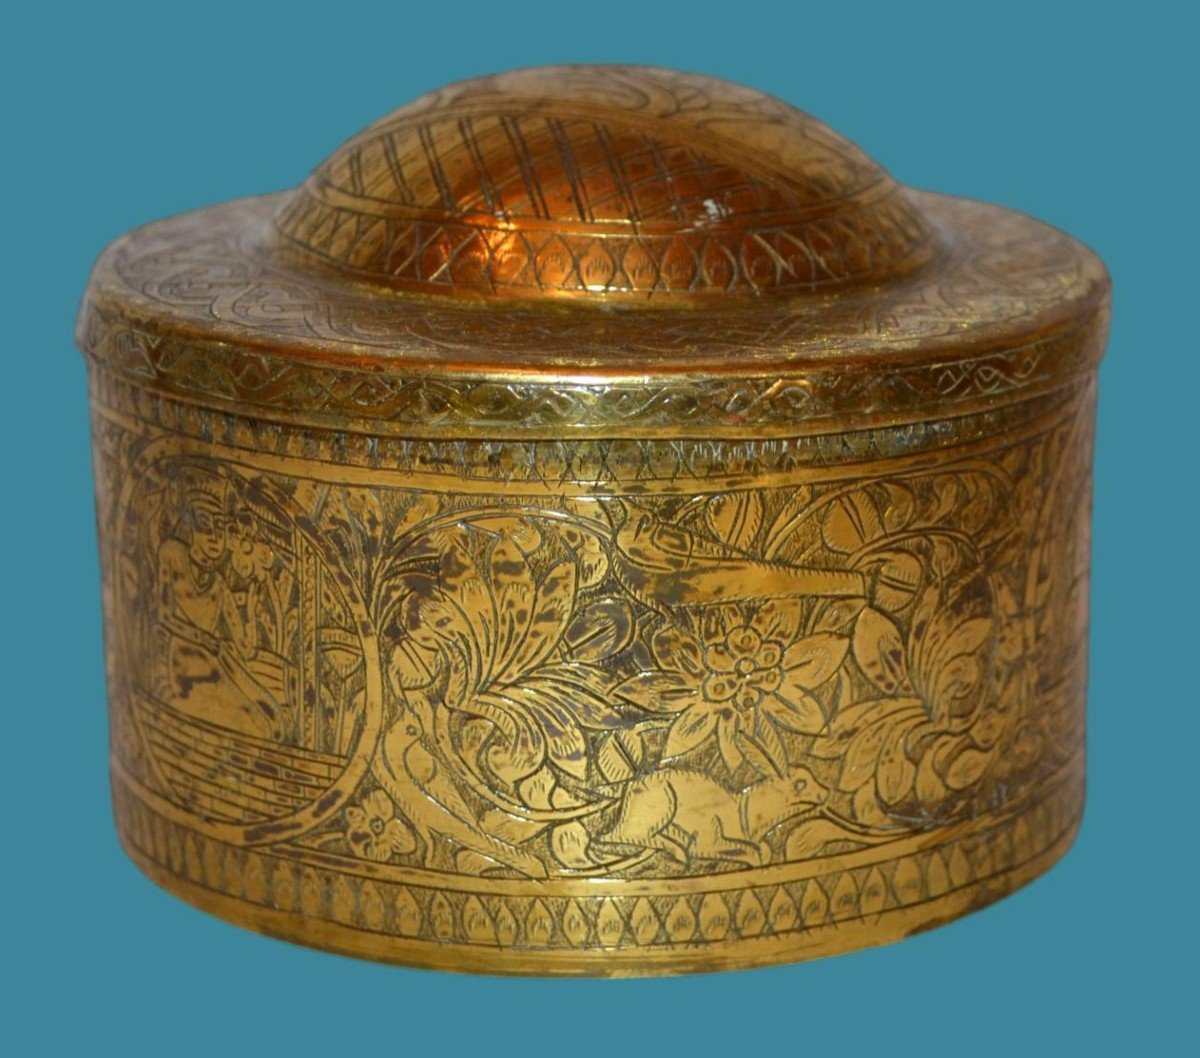 Kadjar Art, Carved Copper Box Of Seated Princes, Flowers, Hare, Cat, And Birds, 19th Century-photo-7